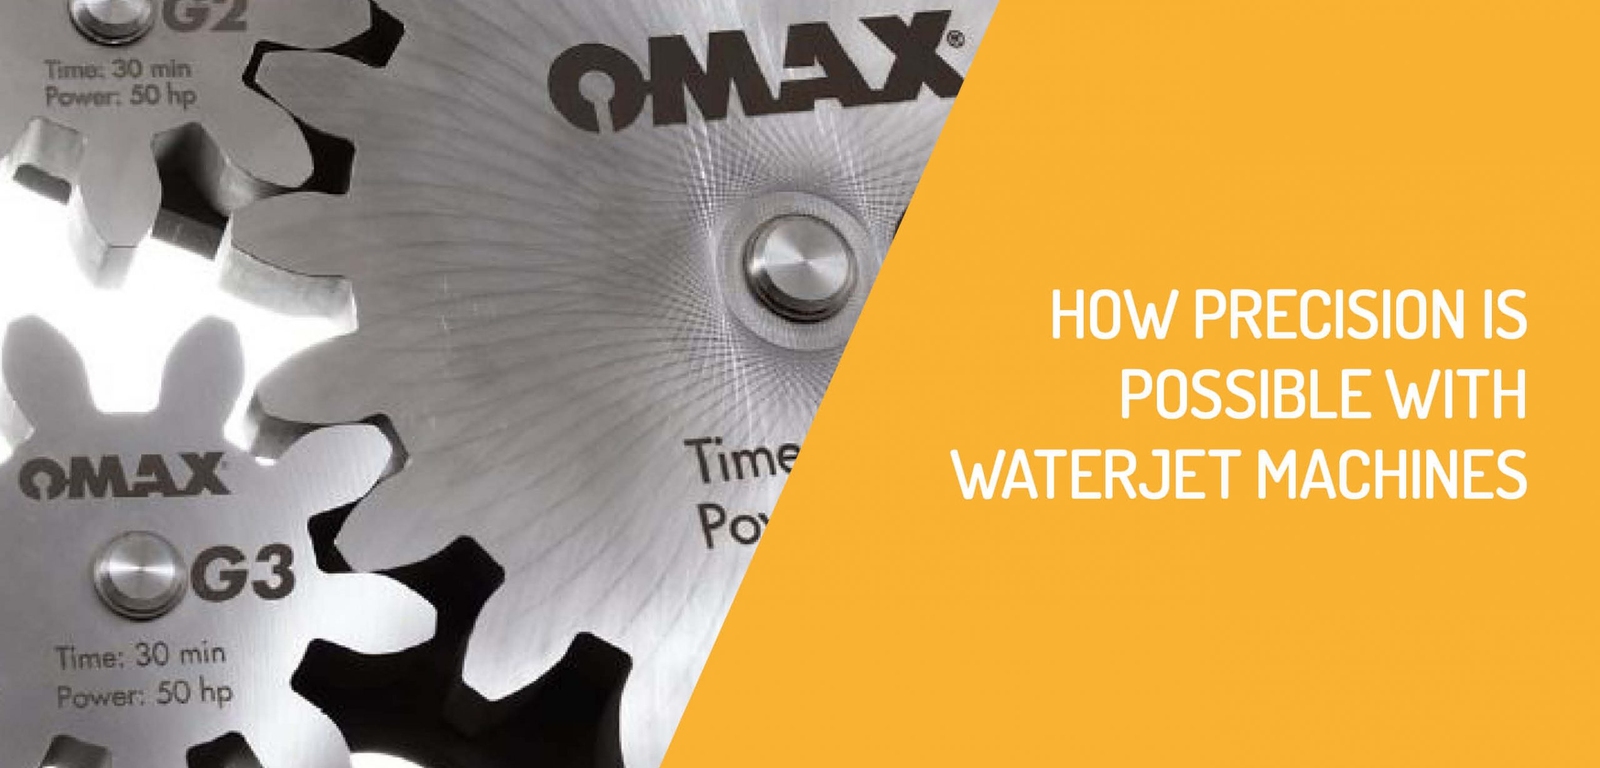 How Precision is Possible With Waterjet Machines